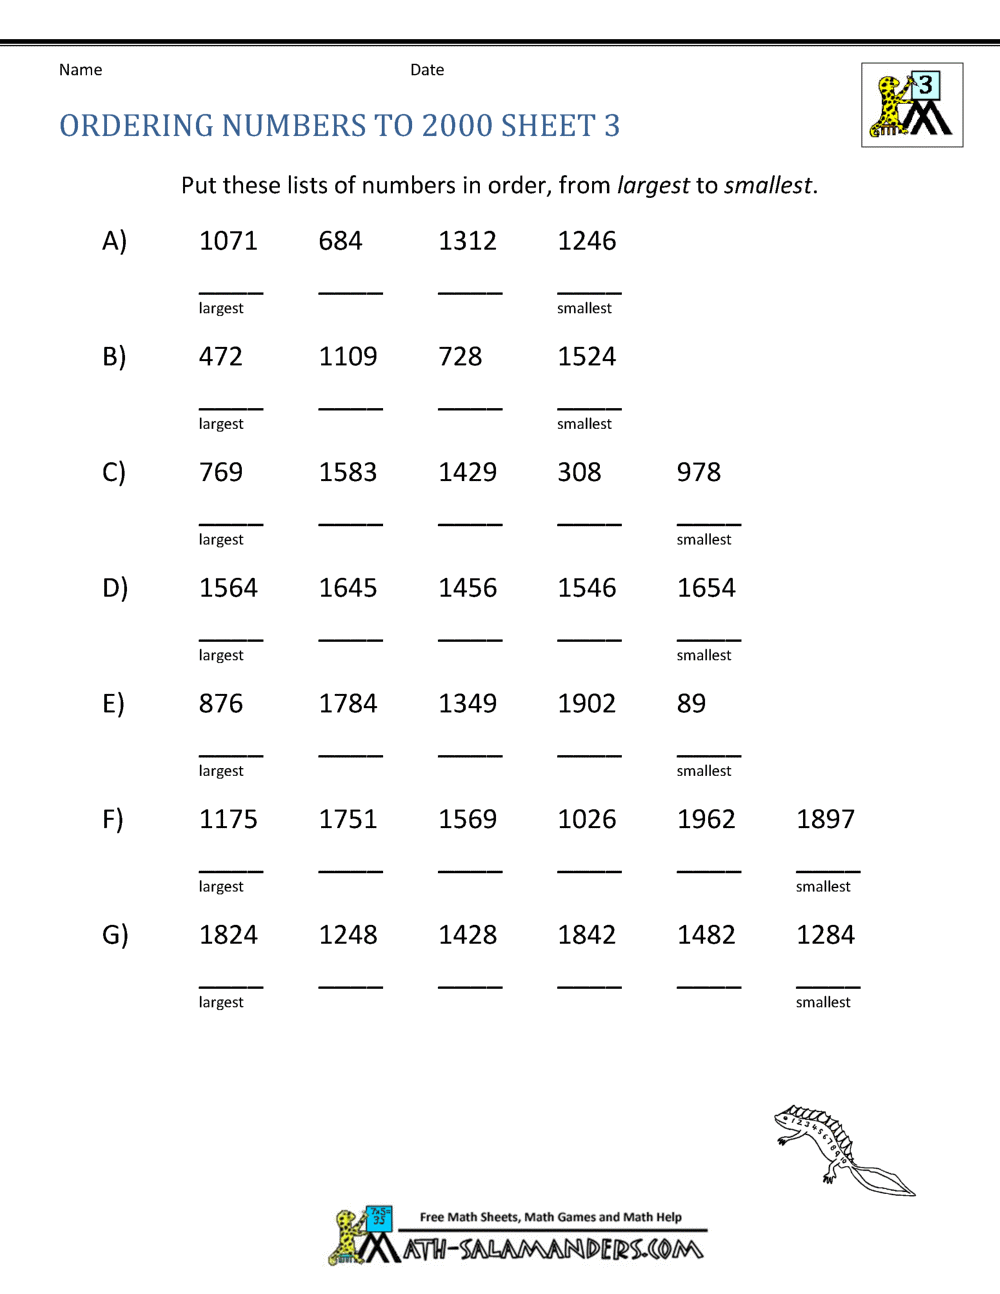 free-3rd-grade-math-worksheets-ordering-numbers-1-2000-3-gif-1-000